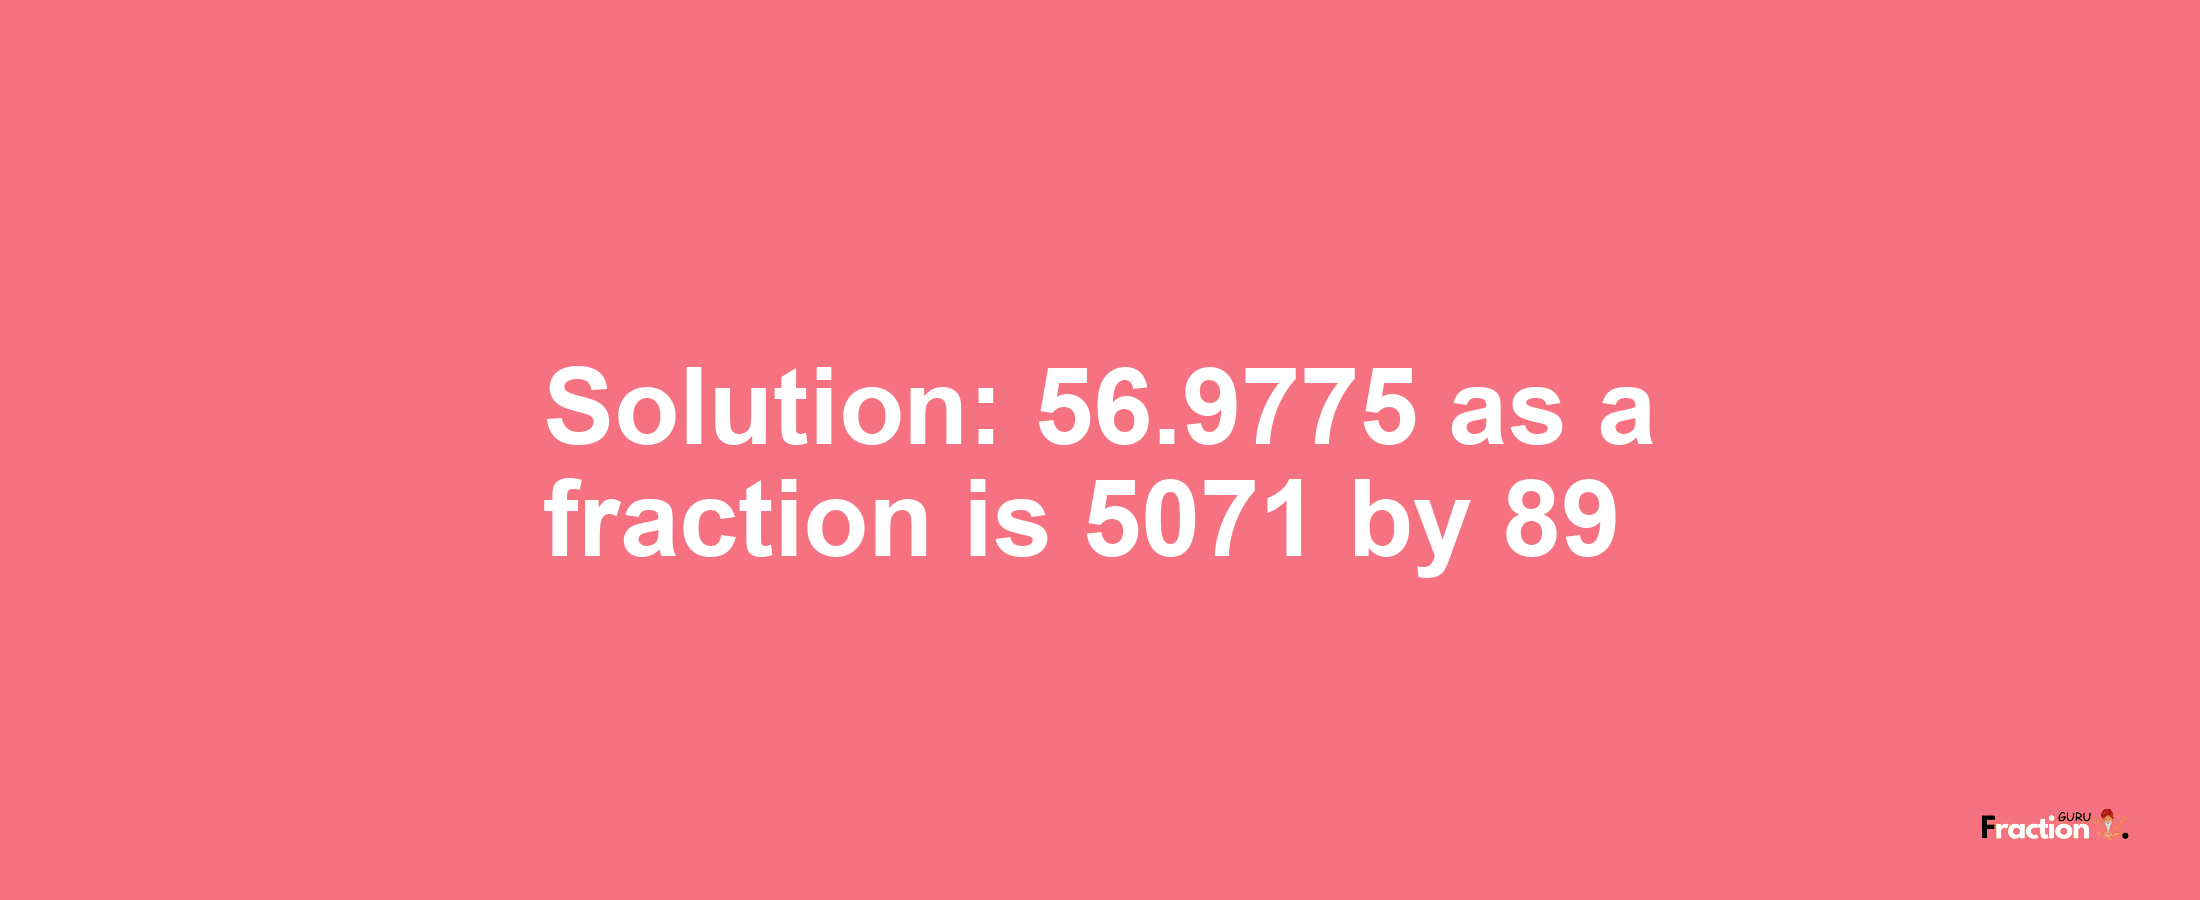 Solution:56.9775 as a fraction is 5071/89